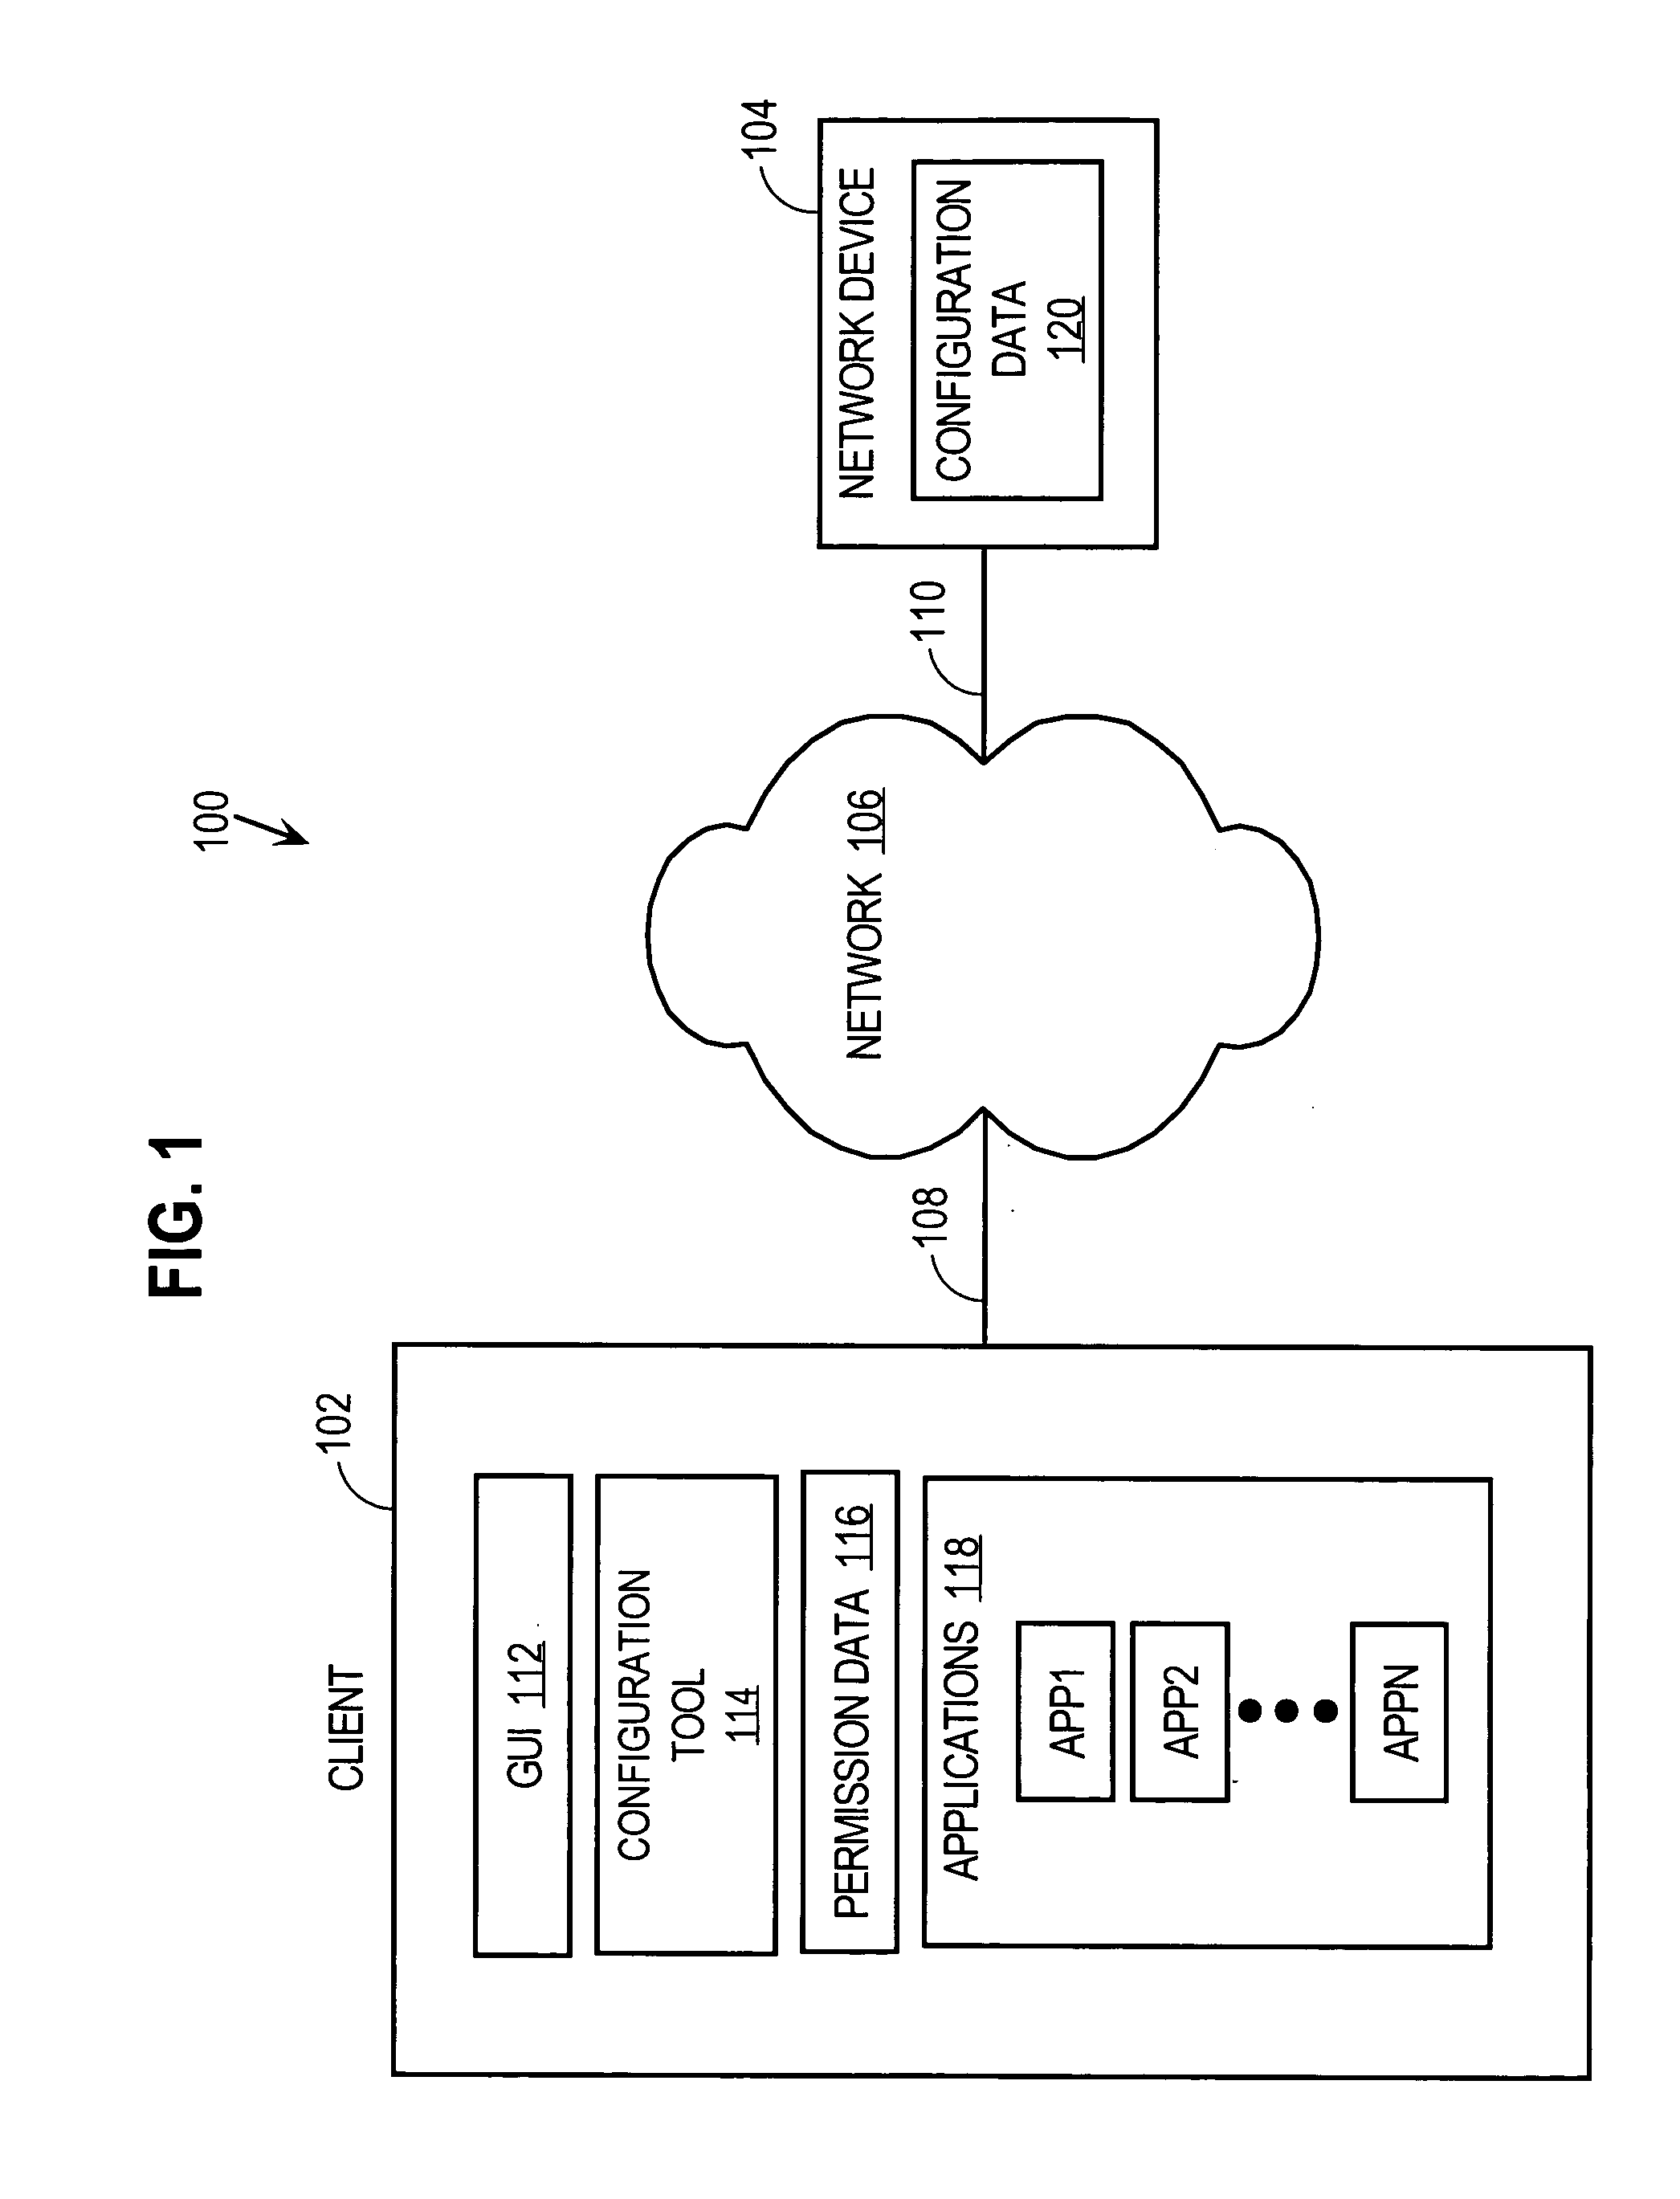 Approach for managing network device configuration data